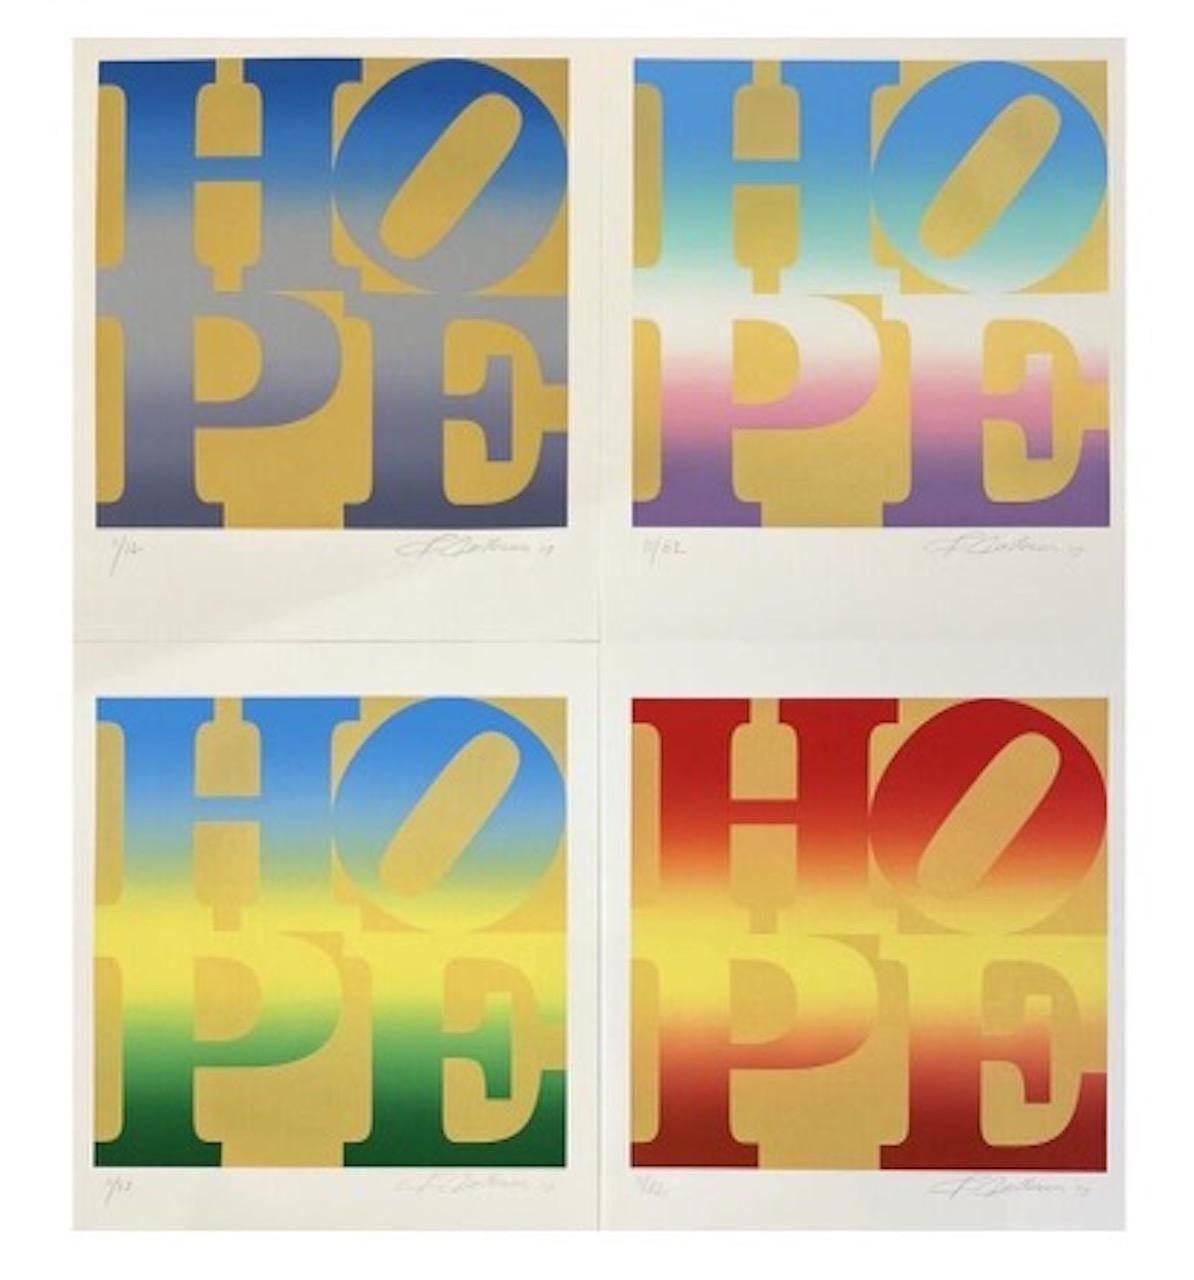 Four Seasons of HOPE, The complete portfolio of 4 prints, Gold Edition - Print by Robert Indiana